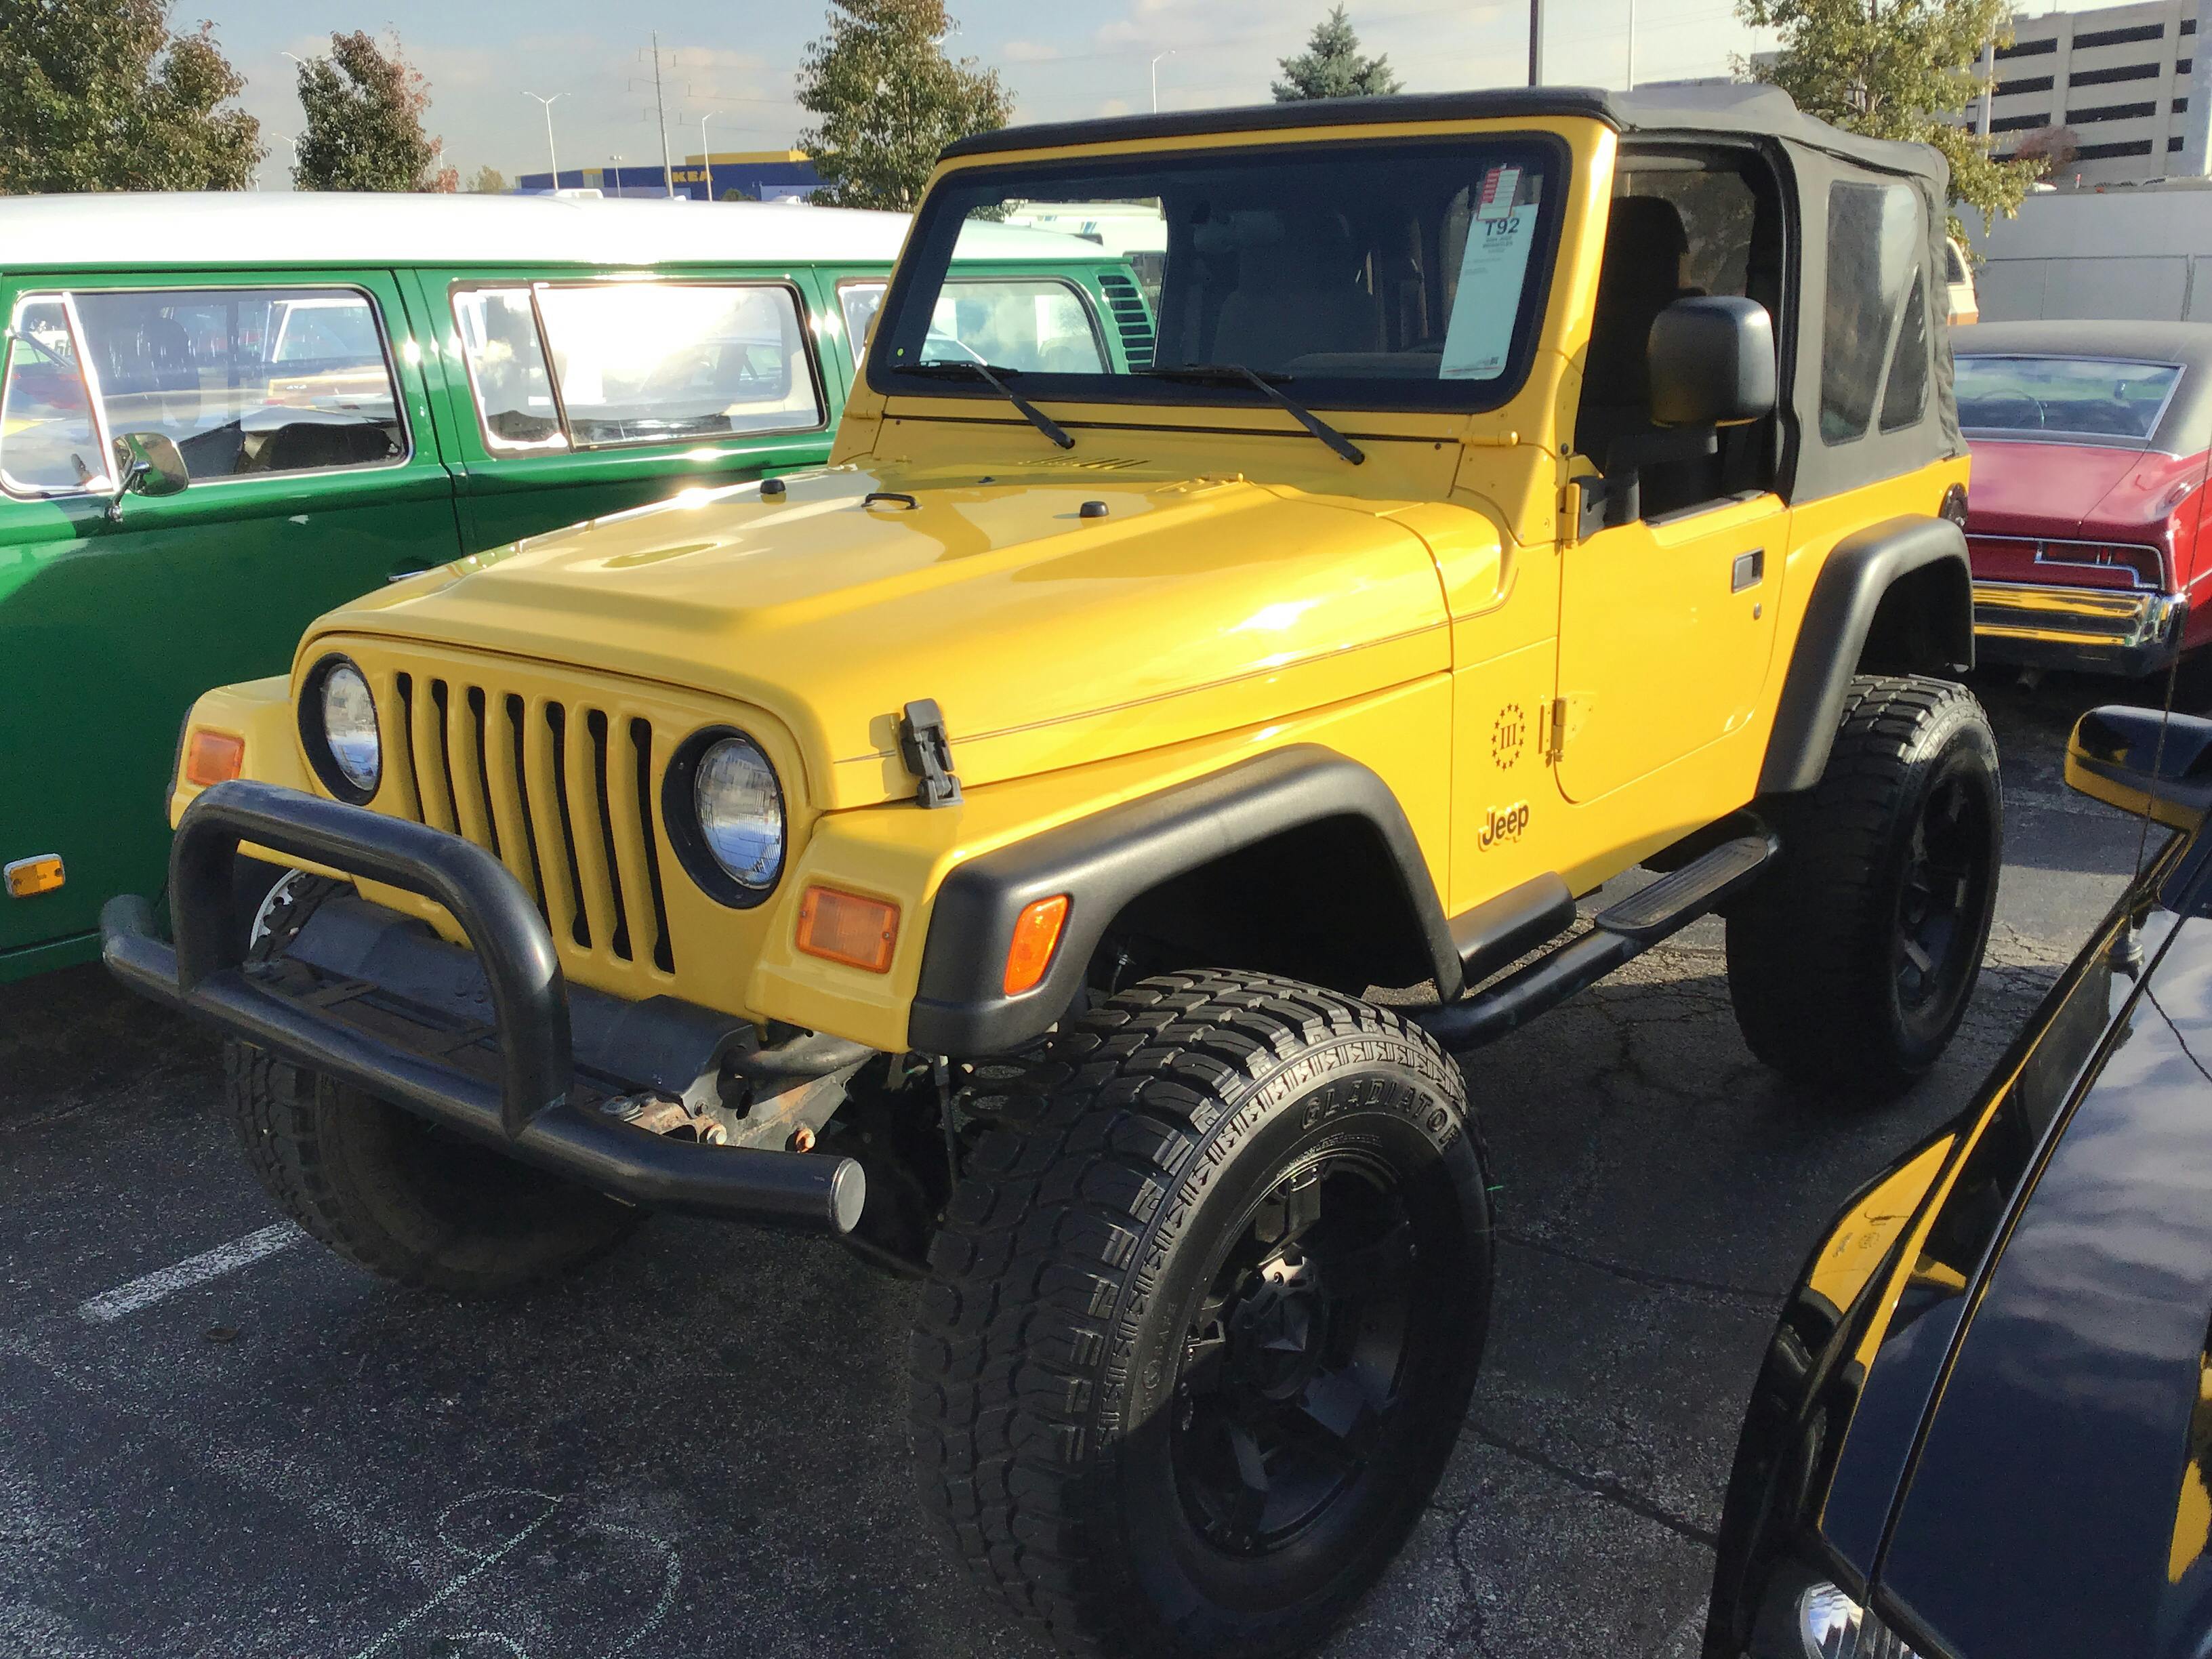 2004 Jeep Wrangler SE | Hagerty Valuation Tools